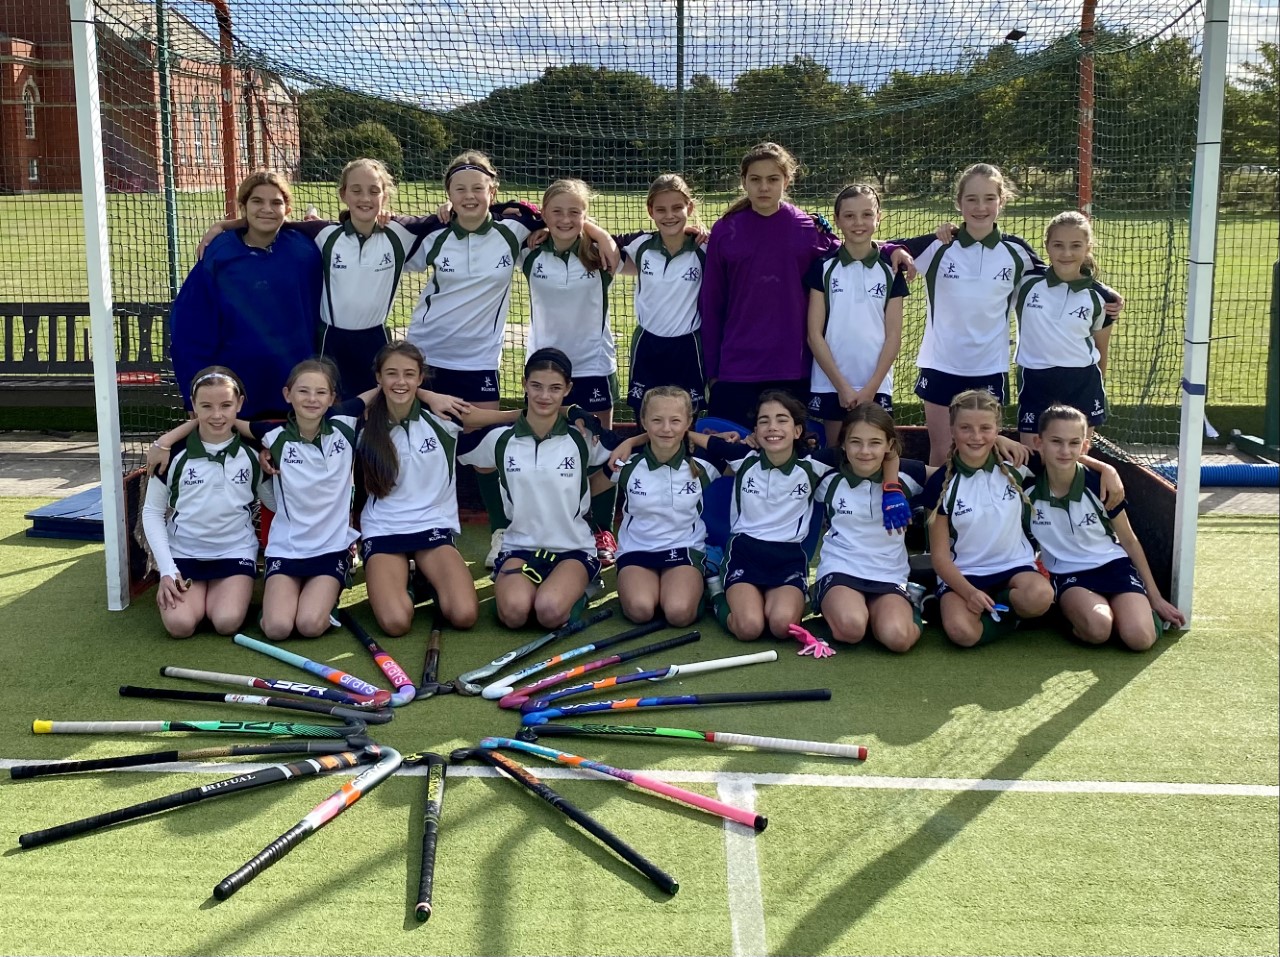 AKS hockey enjoys another successful morning against Wilmslow High School